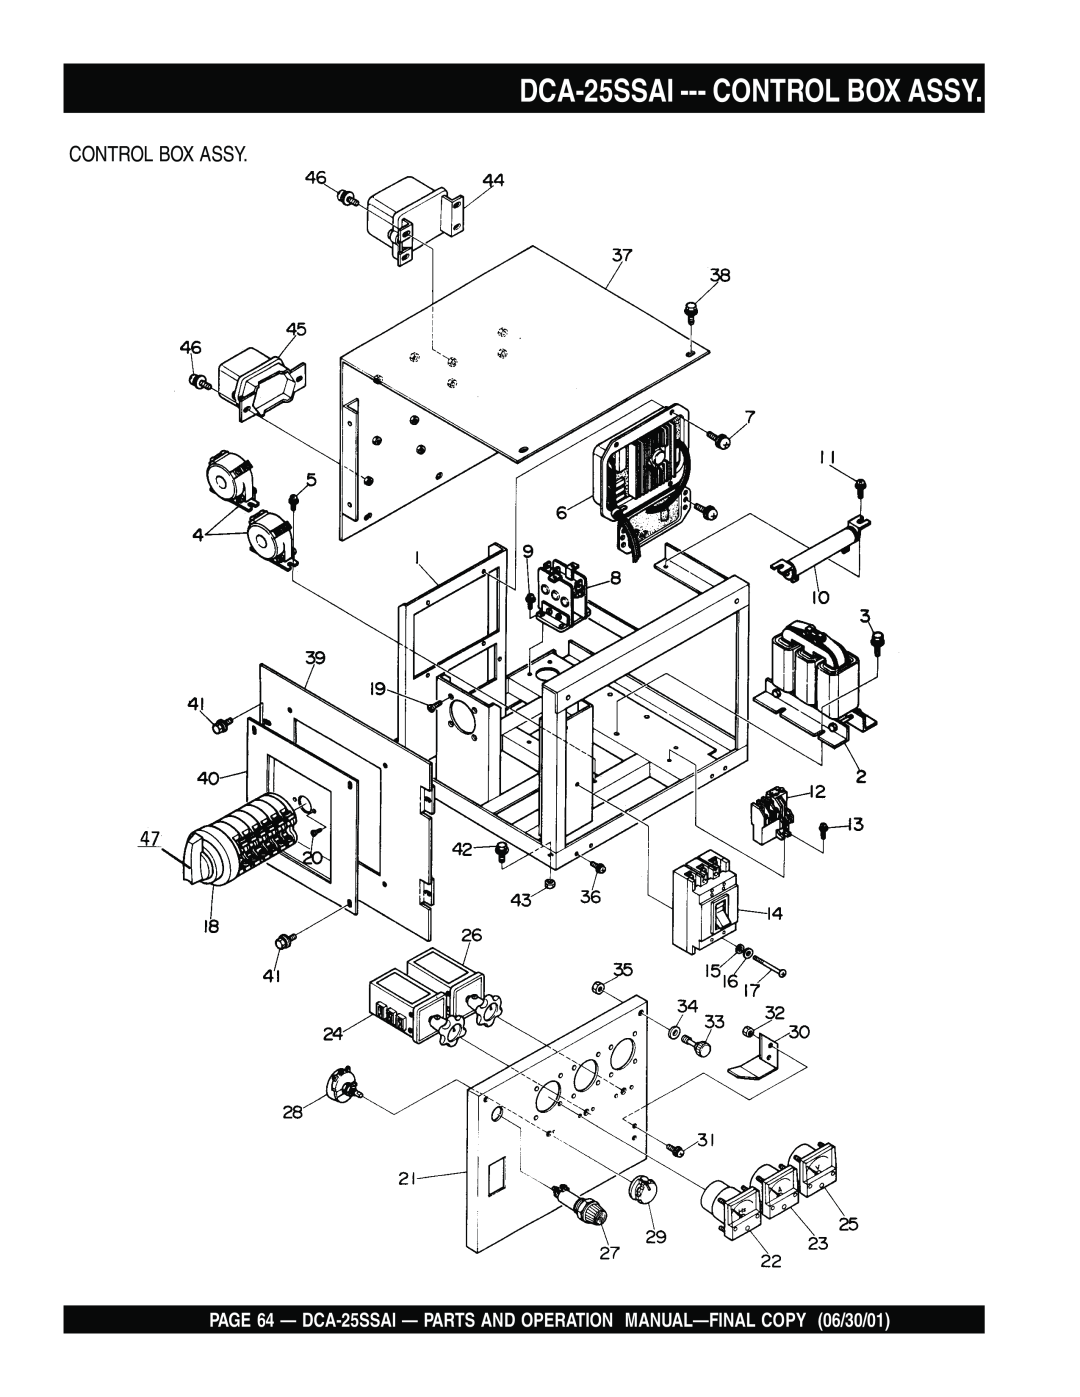 Multiquip DCA-25SSAI --- CONTROL BOX ASSY, PAGE 64 - DCA-25SSAI - PARTS AND OPERATION MANUAL-FINAL COPY 06/30/01 